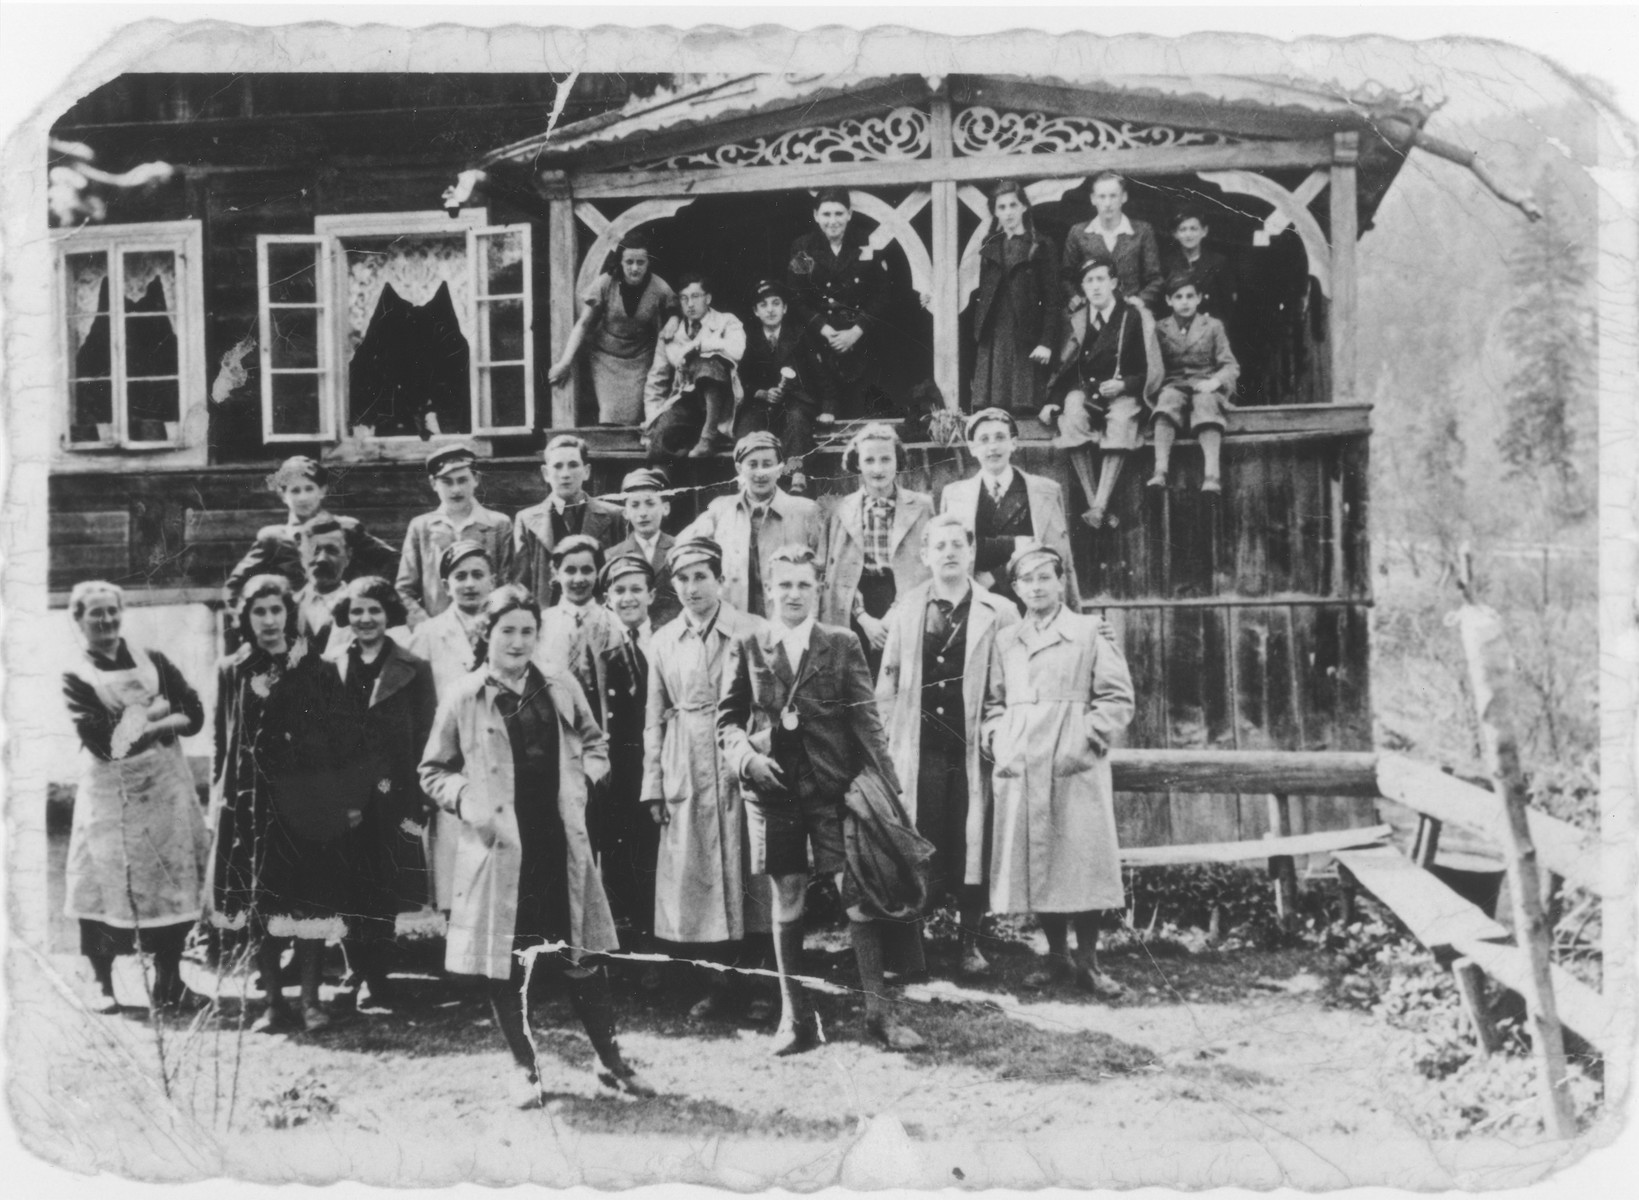 Group portrait of students from a Jewish business high school on a class trip shortly before the start of World War II.